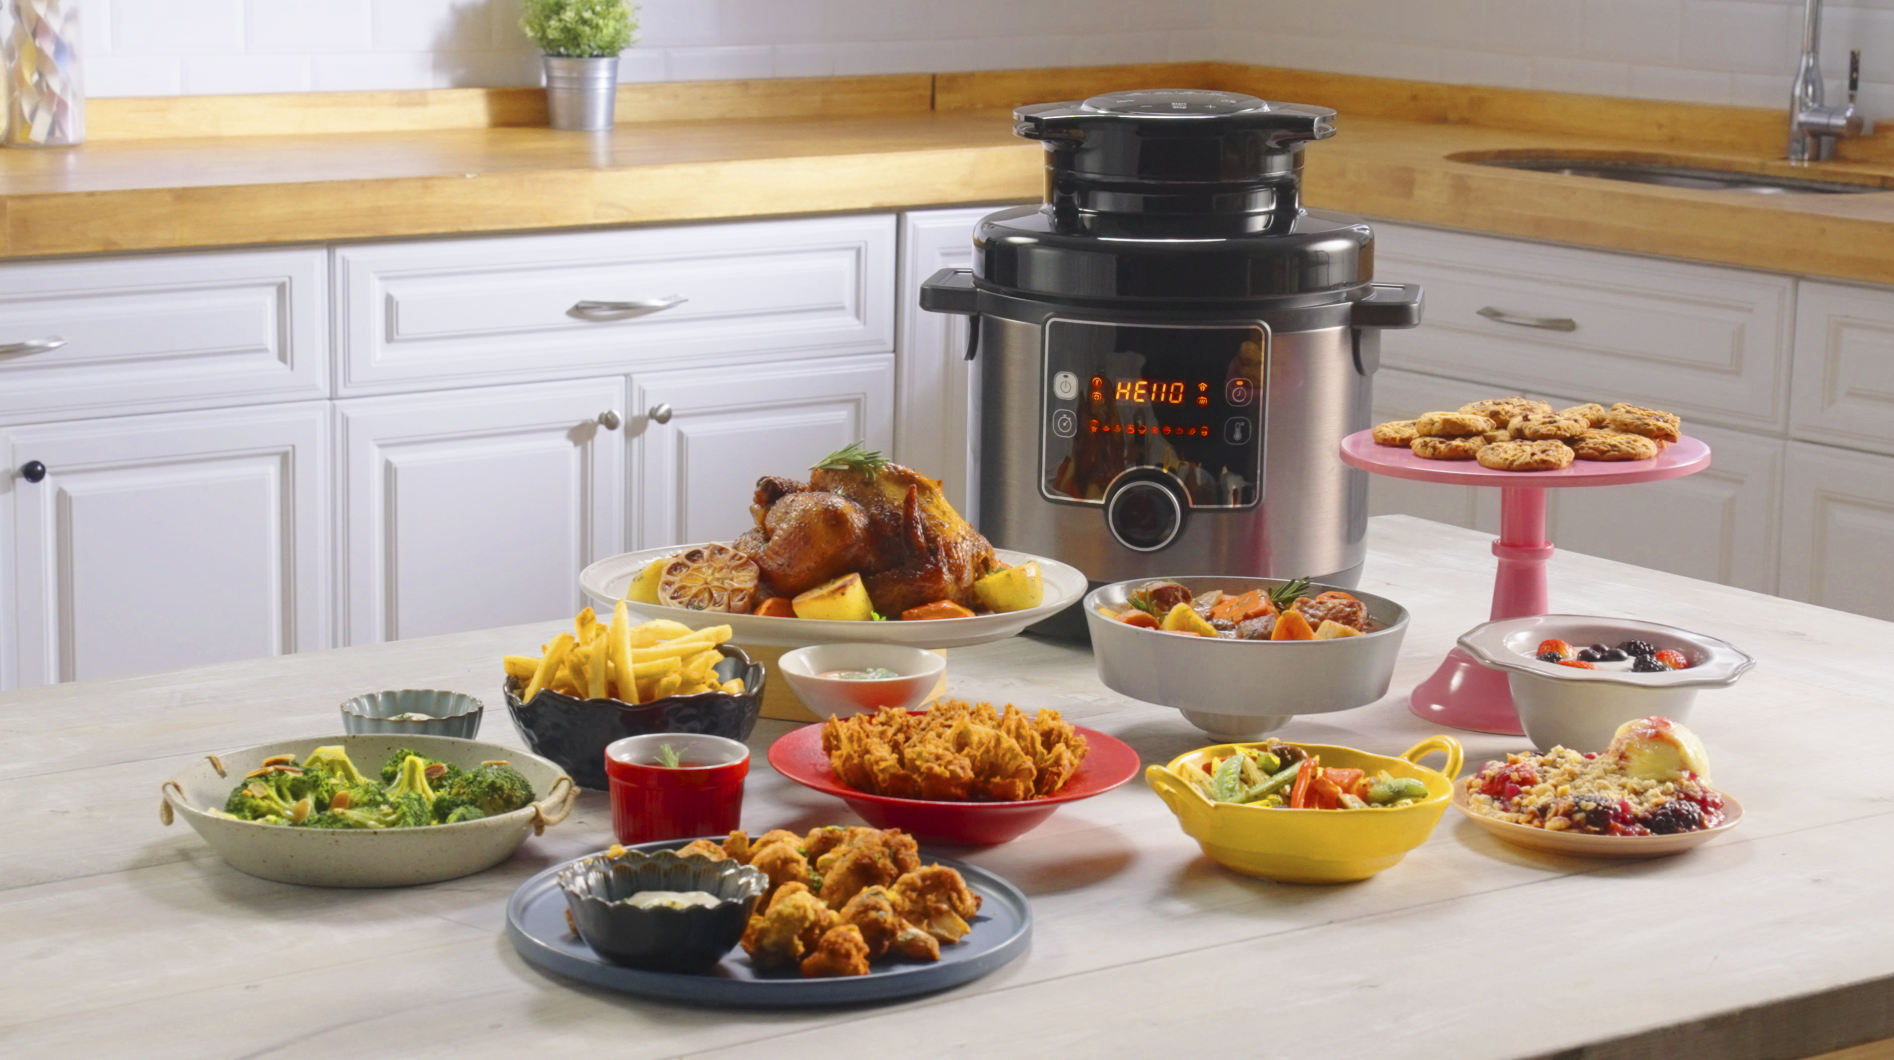 Turbo Cuisine Maxi & Fry Air Fryer and Multicooker CY7788